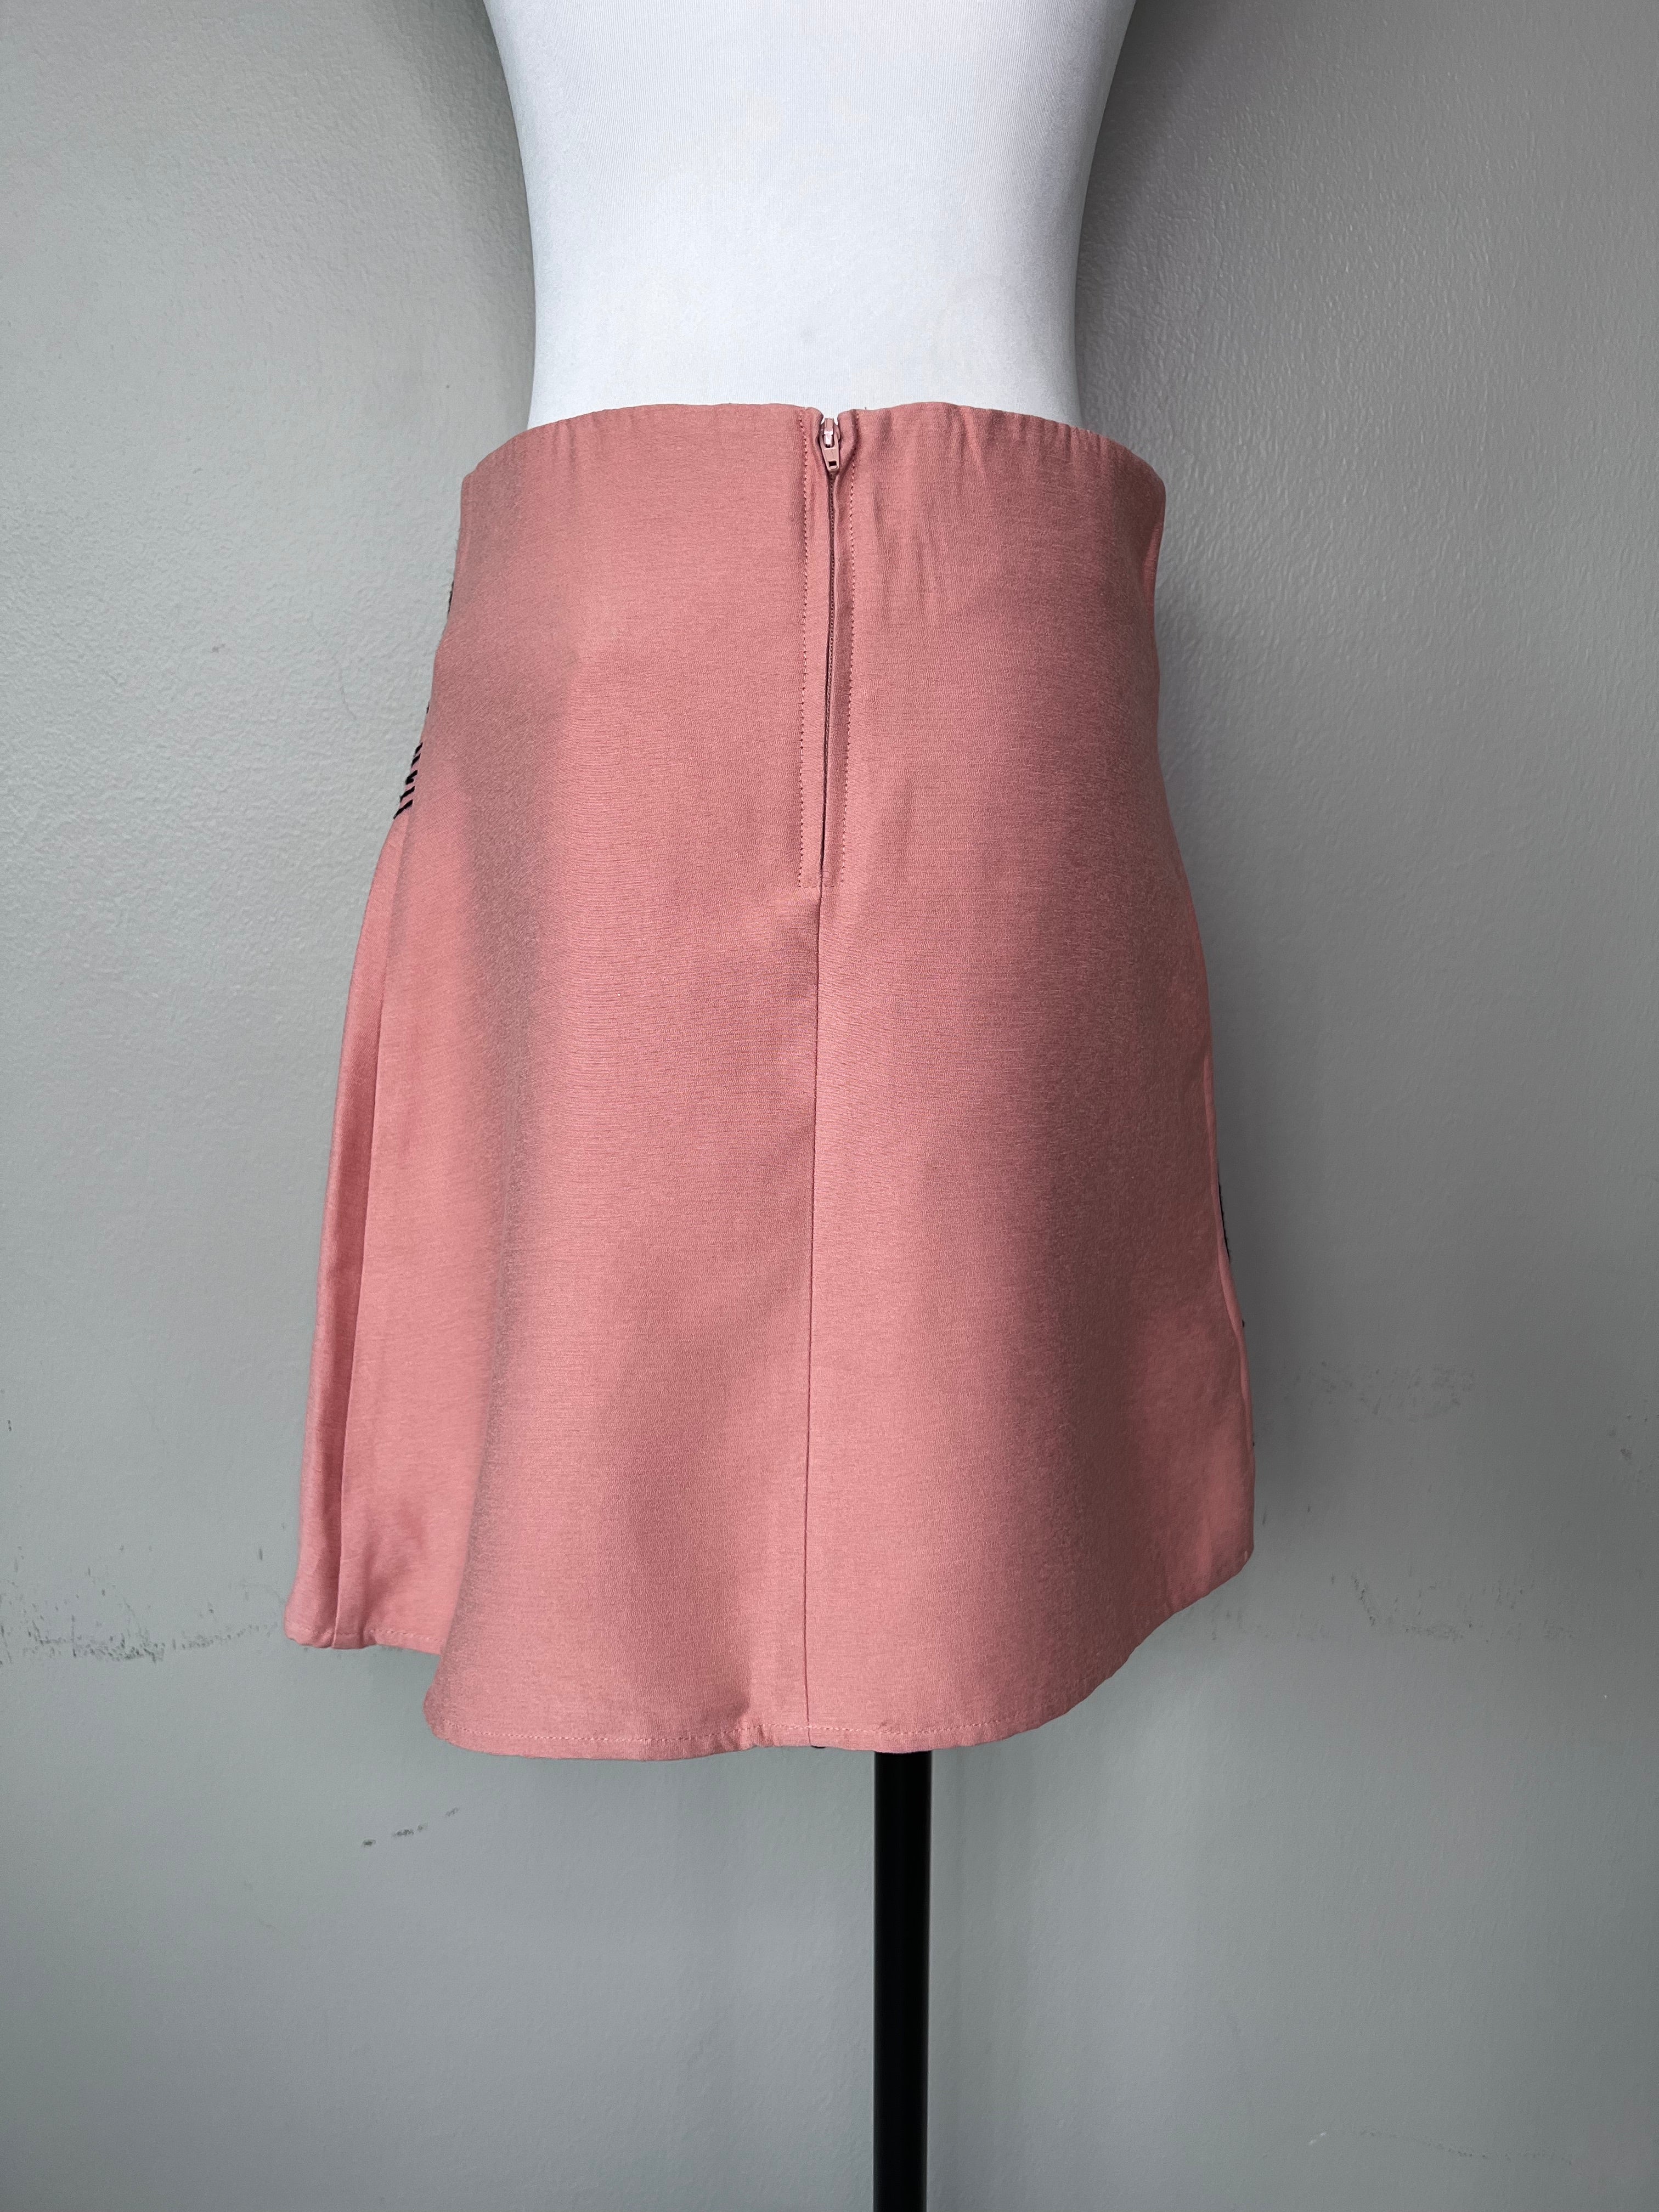 Baby pink skirt with black and white stitching - C/MEO COLLECTIVE